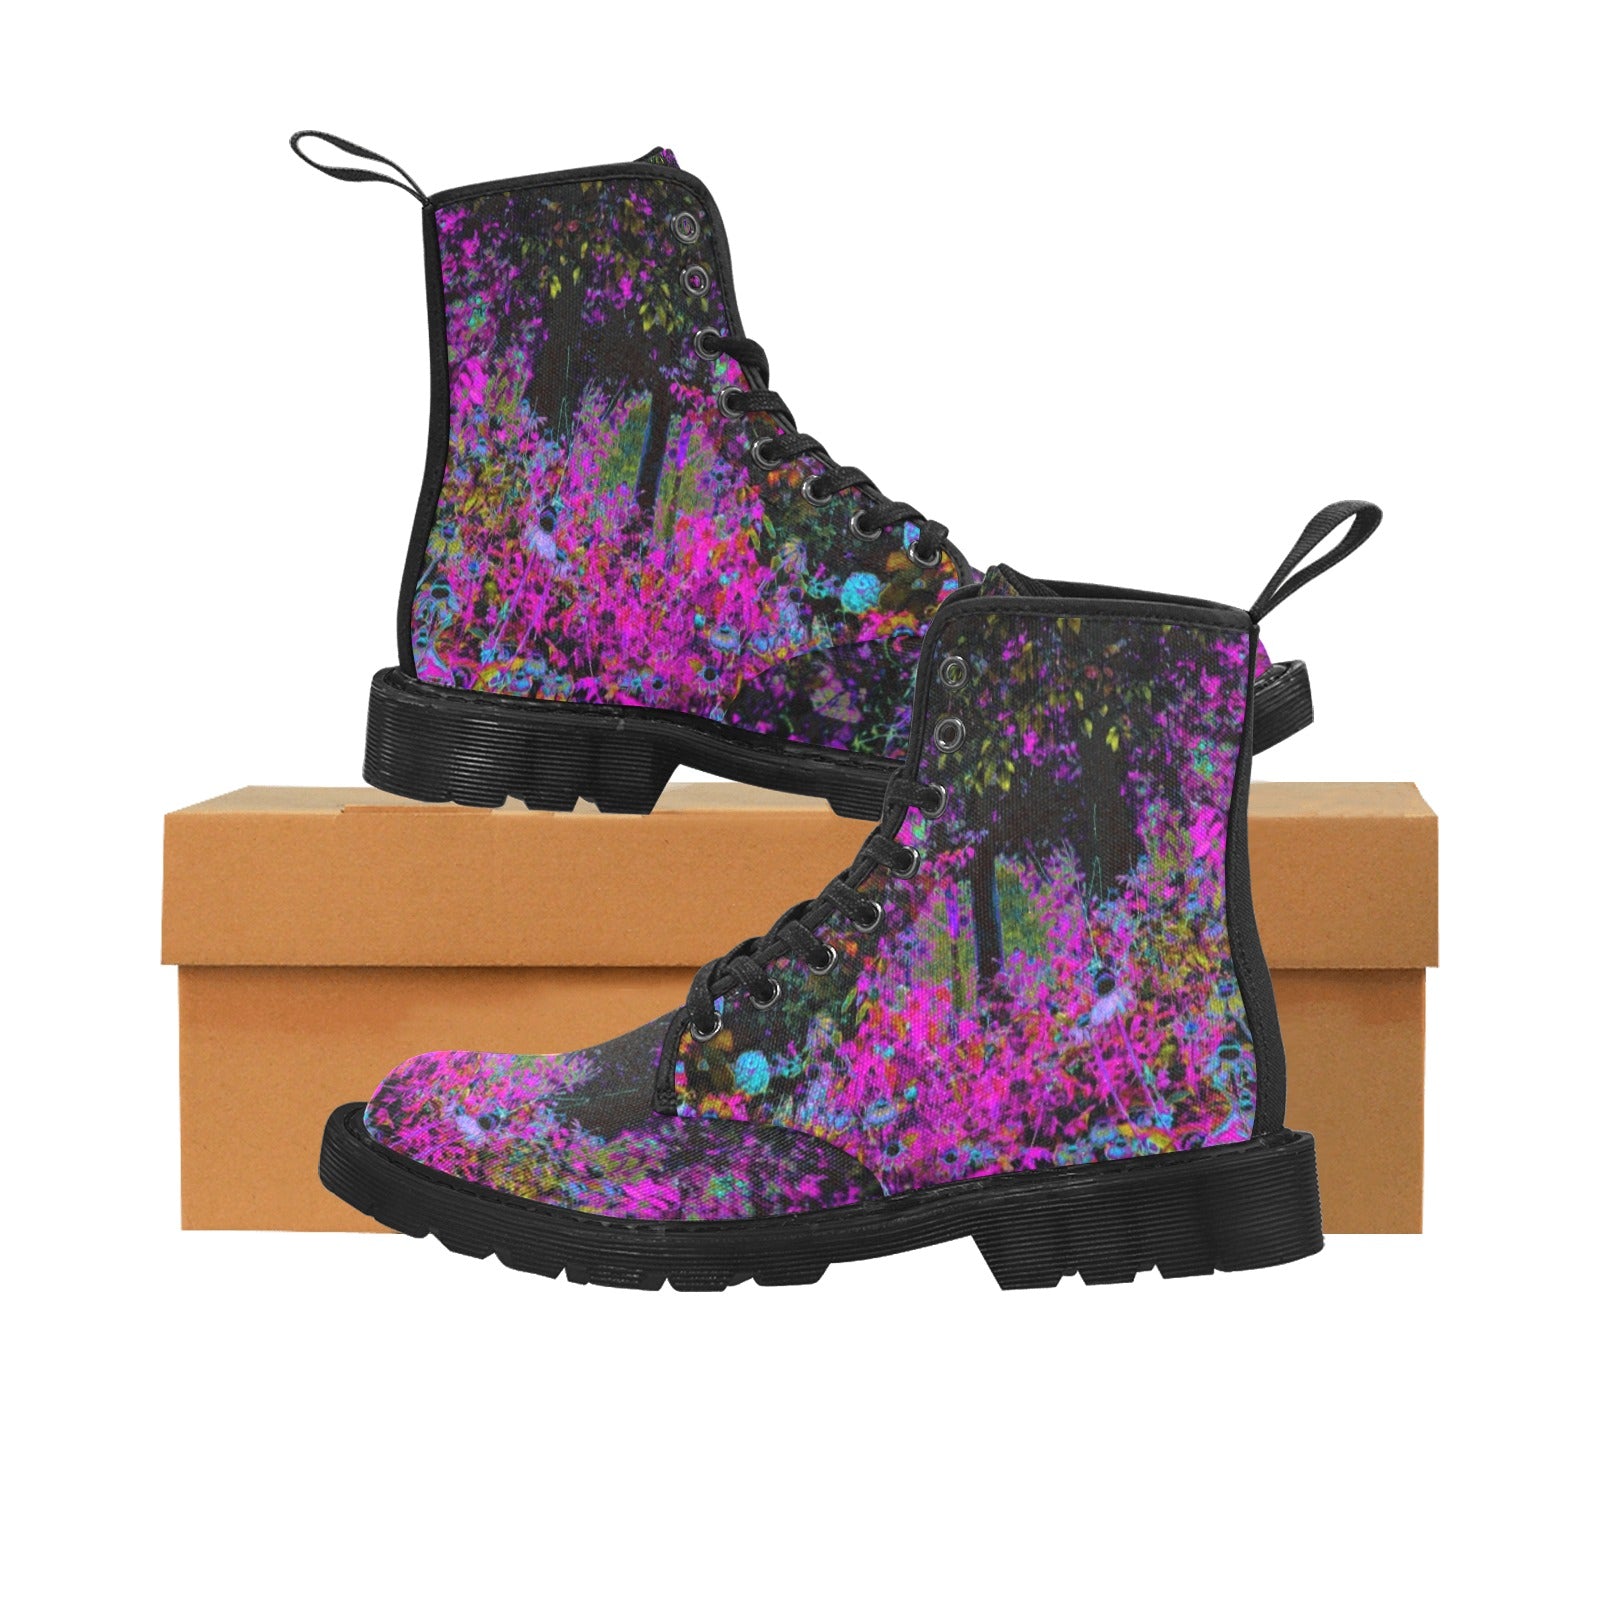 Boots for Women, Psychedelic Hot Pink and Black Garden Sunrise - Black